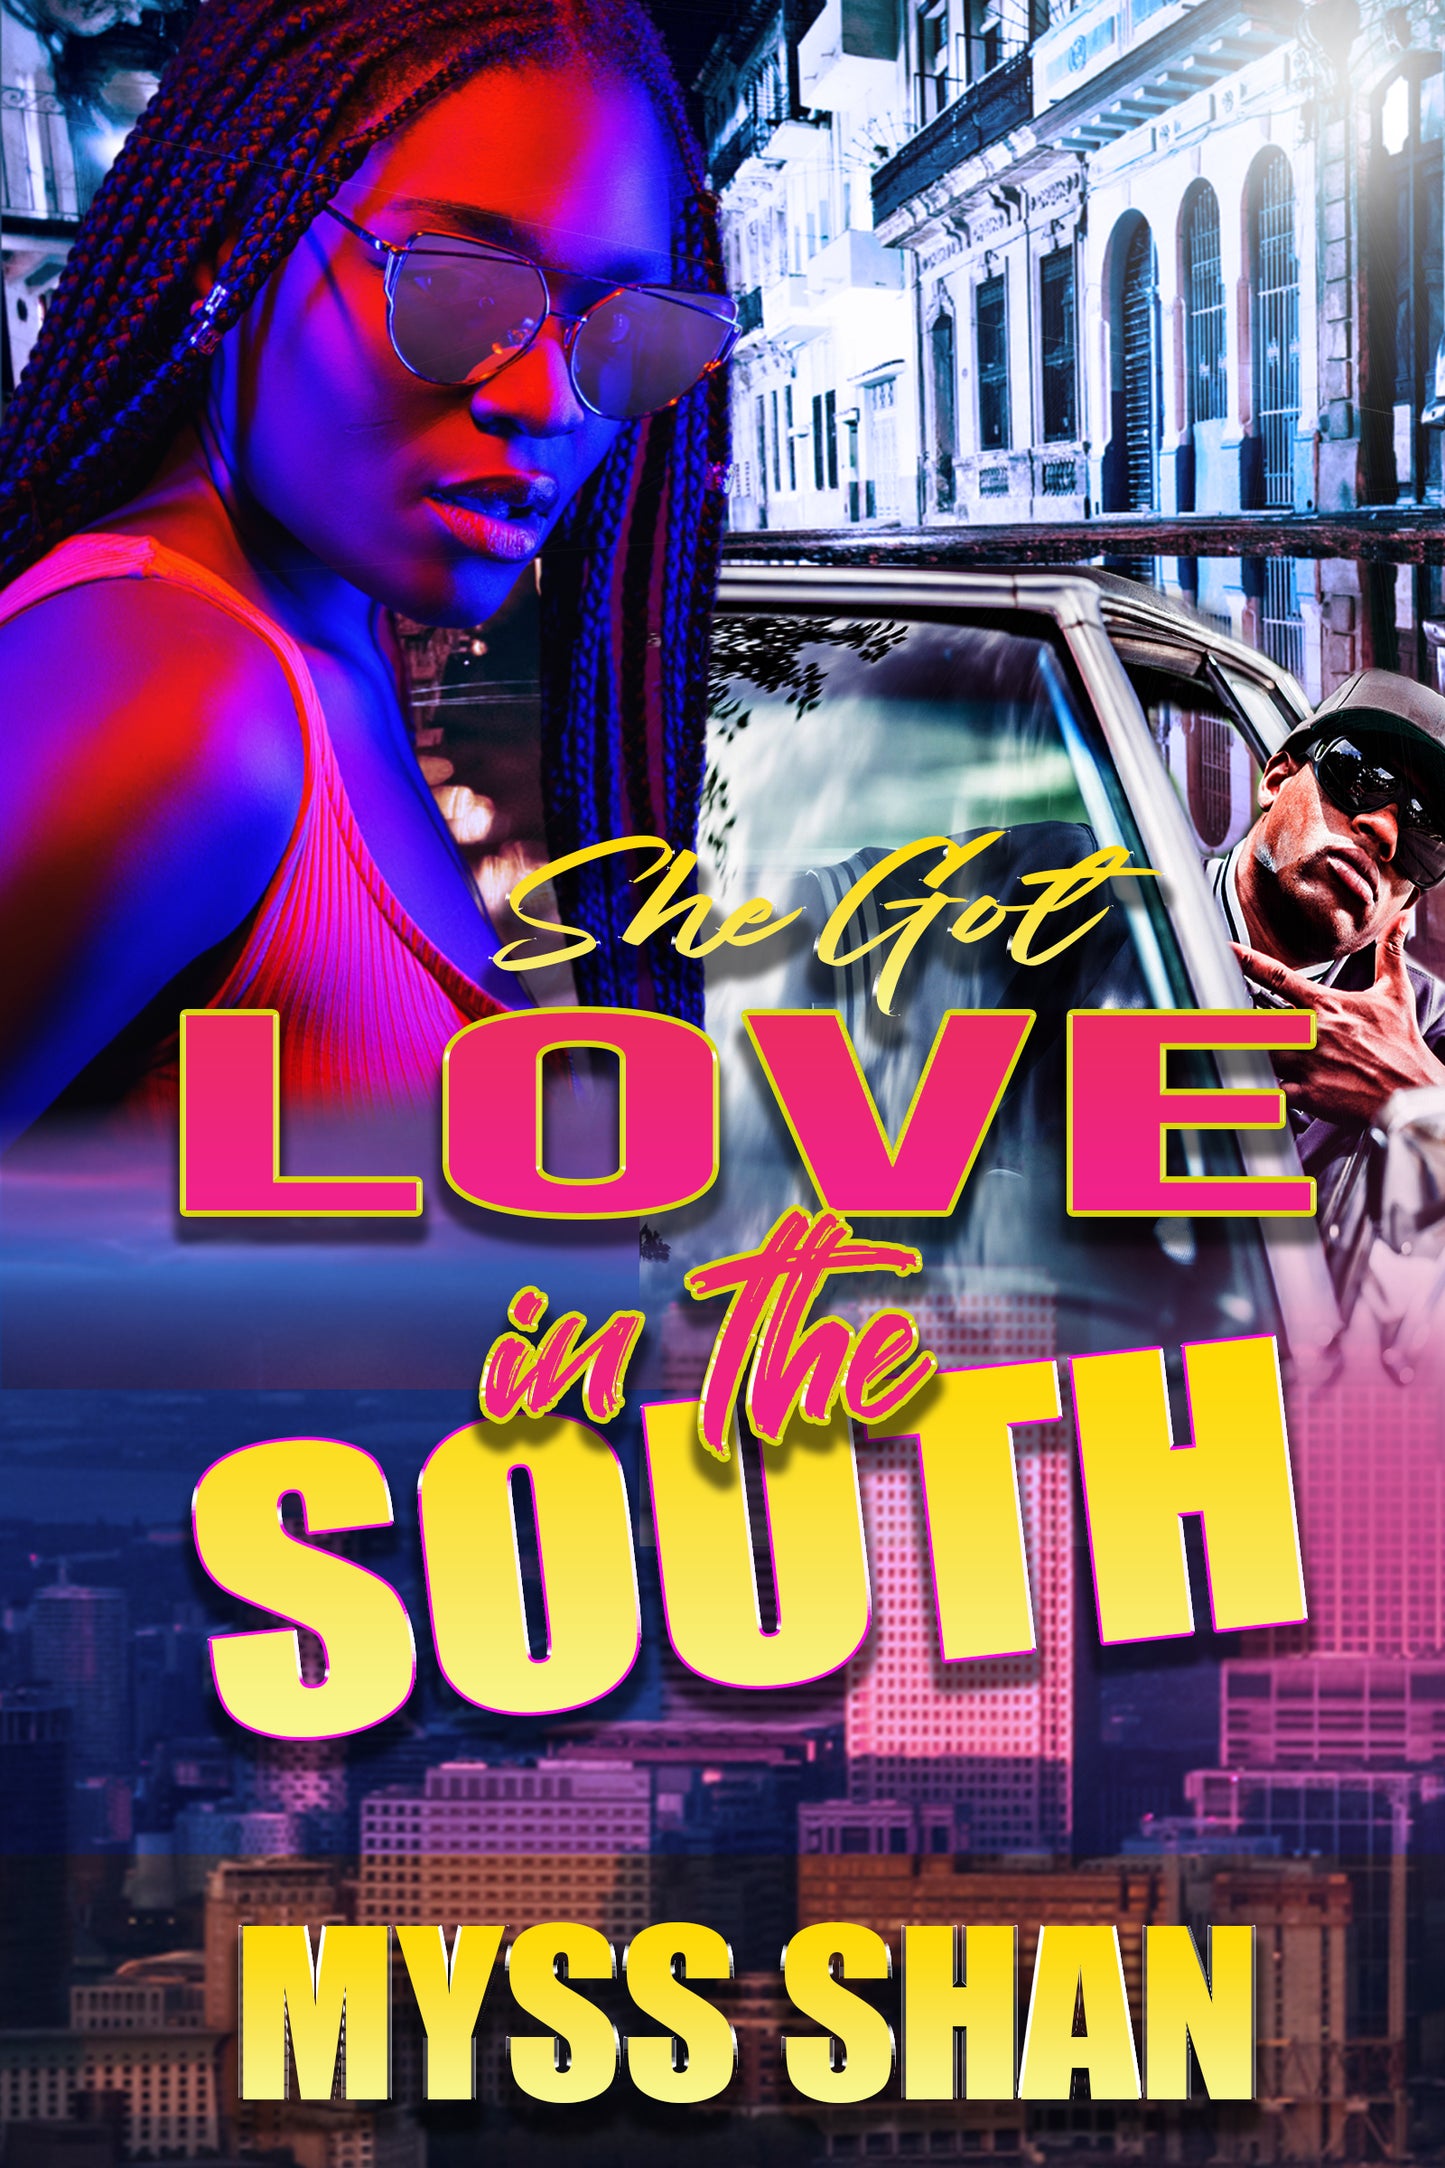 She Got Love in the South